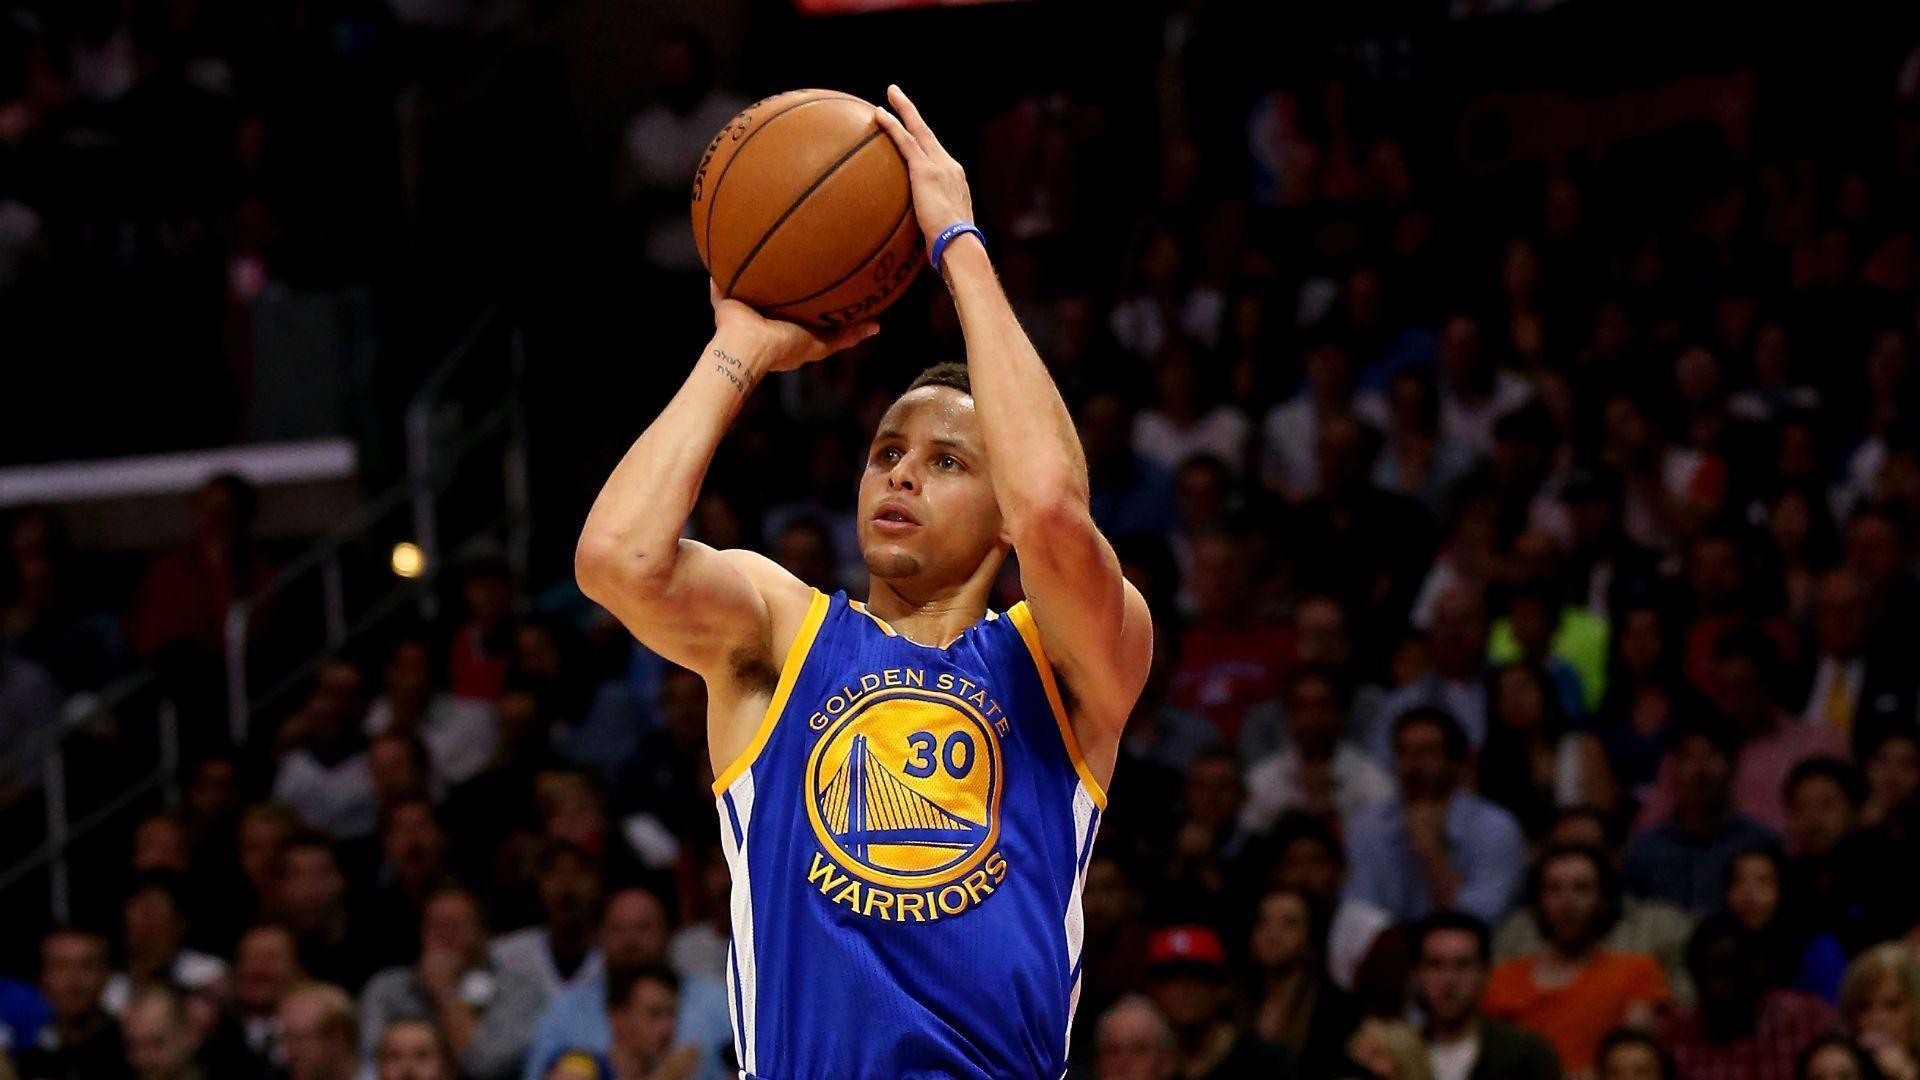 Stephen Curry Wallpaper Image Photo Picture Background